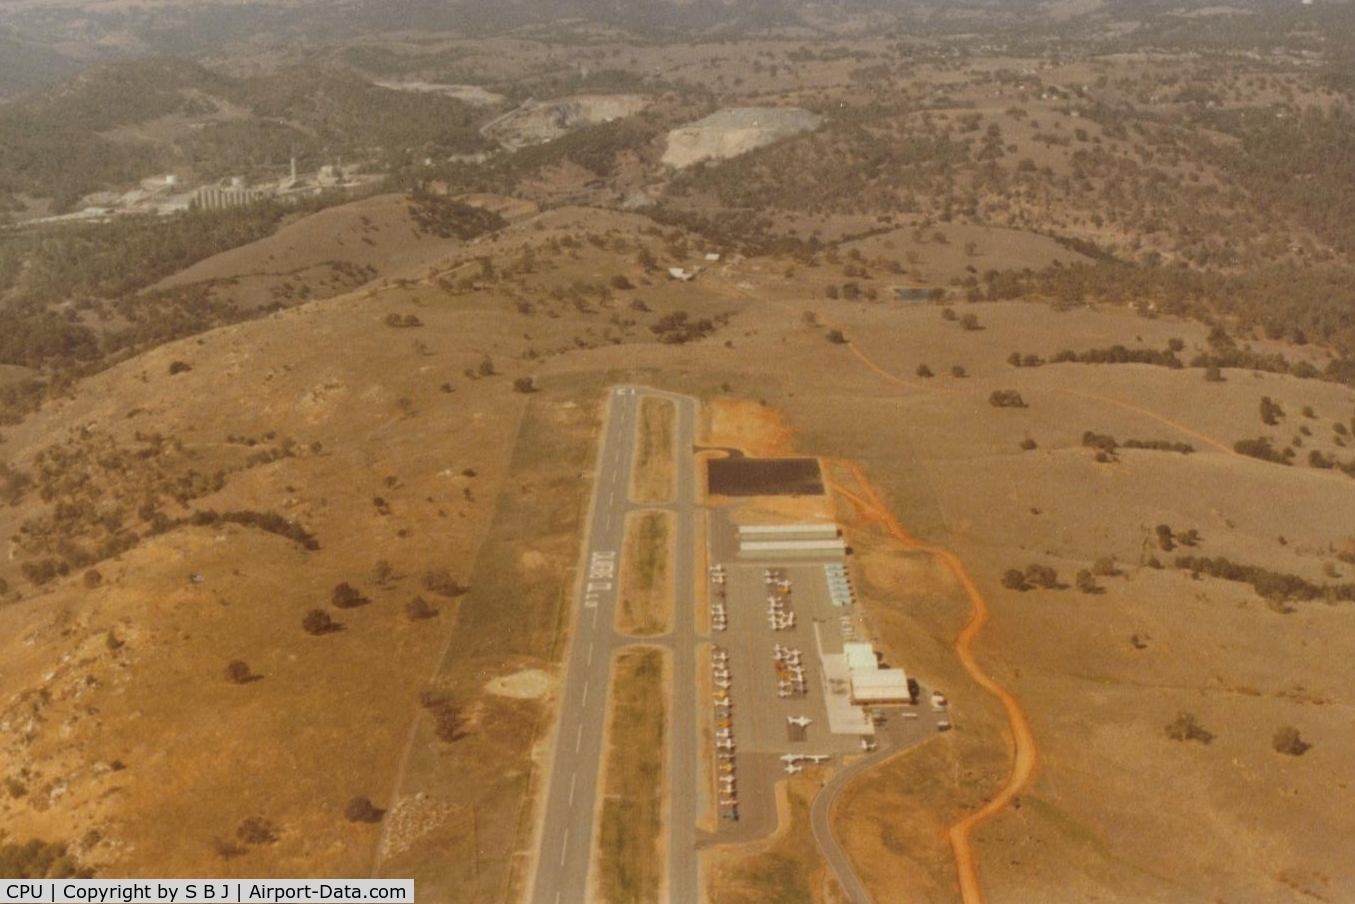 Calaveras Co-maury Rasmussen Field Airport (CPU) - Nice airport and it replaced the old airport (in the mid 80s) that was a short walk to downtown San Andreas which was nice. O well-I guess they call this progress ? View is north with old cement plant (long closed) top left and town of S A top right.